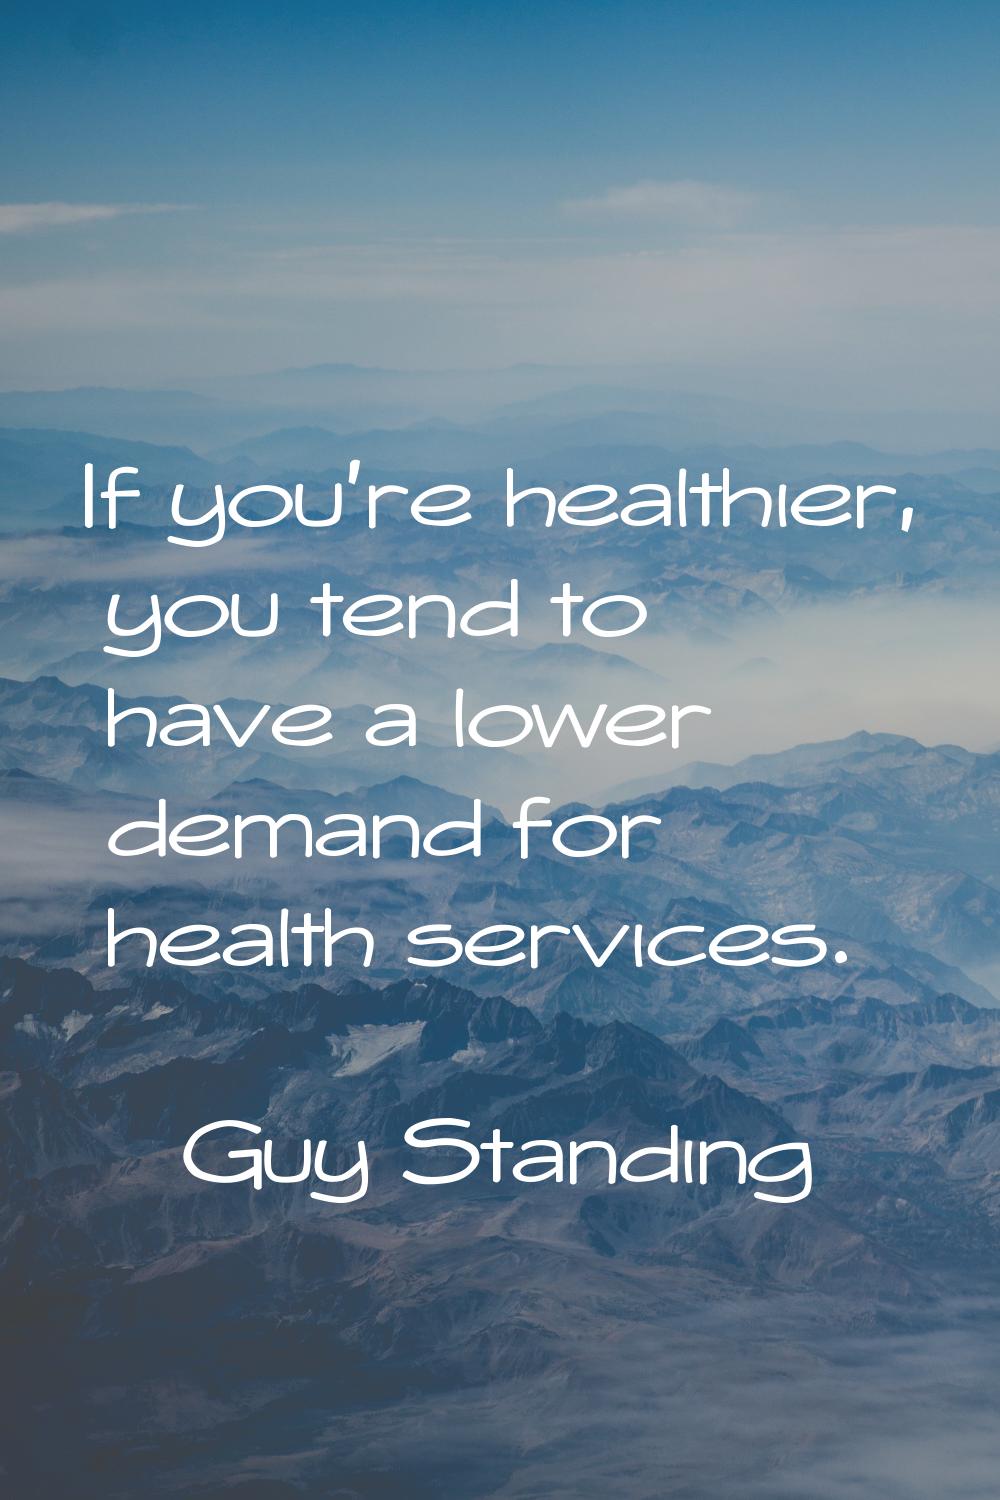 If you're healthier, you tend to have a lower demand for health services.